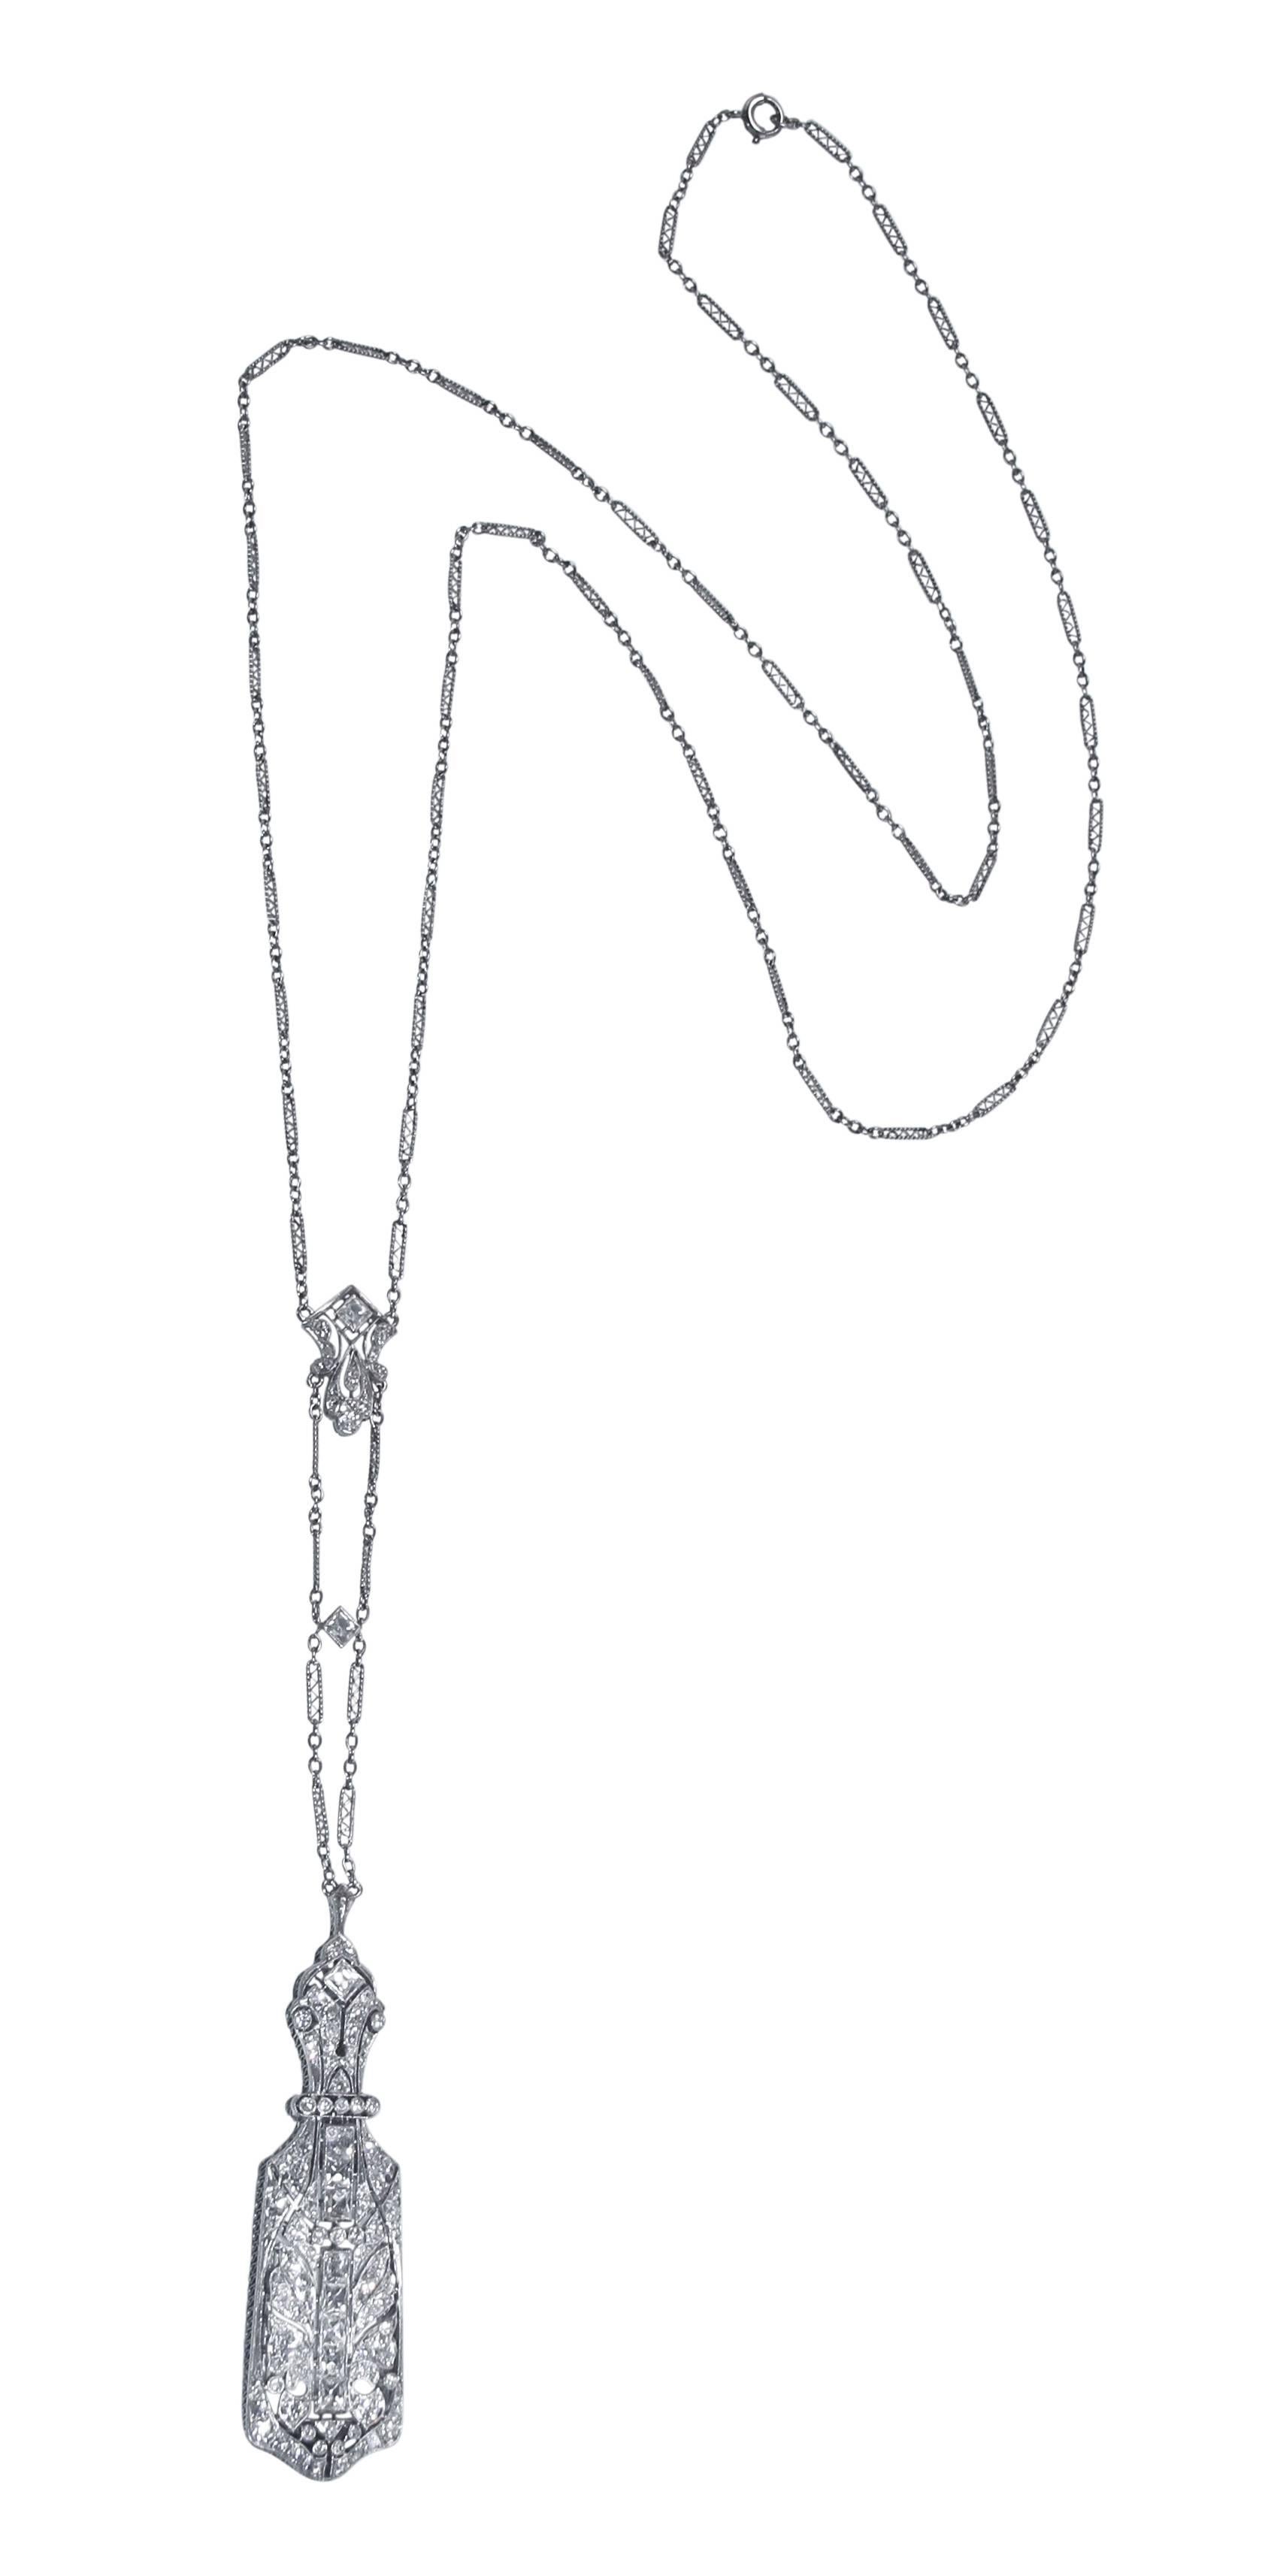 Art Deco platinum and diamond lorgnette longchain, designed as an openwork rectangular plaque with the reverse opening to reveal a pair of reading glasses all suspended from an ornate plaque link chain, set with 11 French-cut diamonds weighing